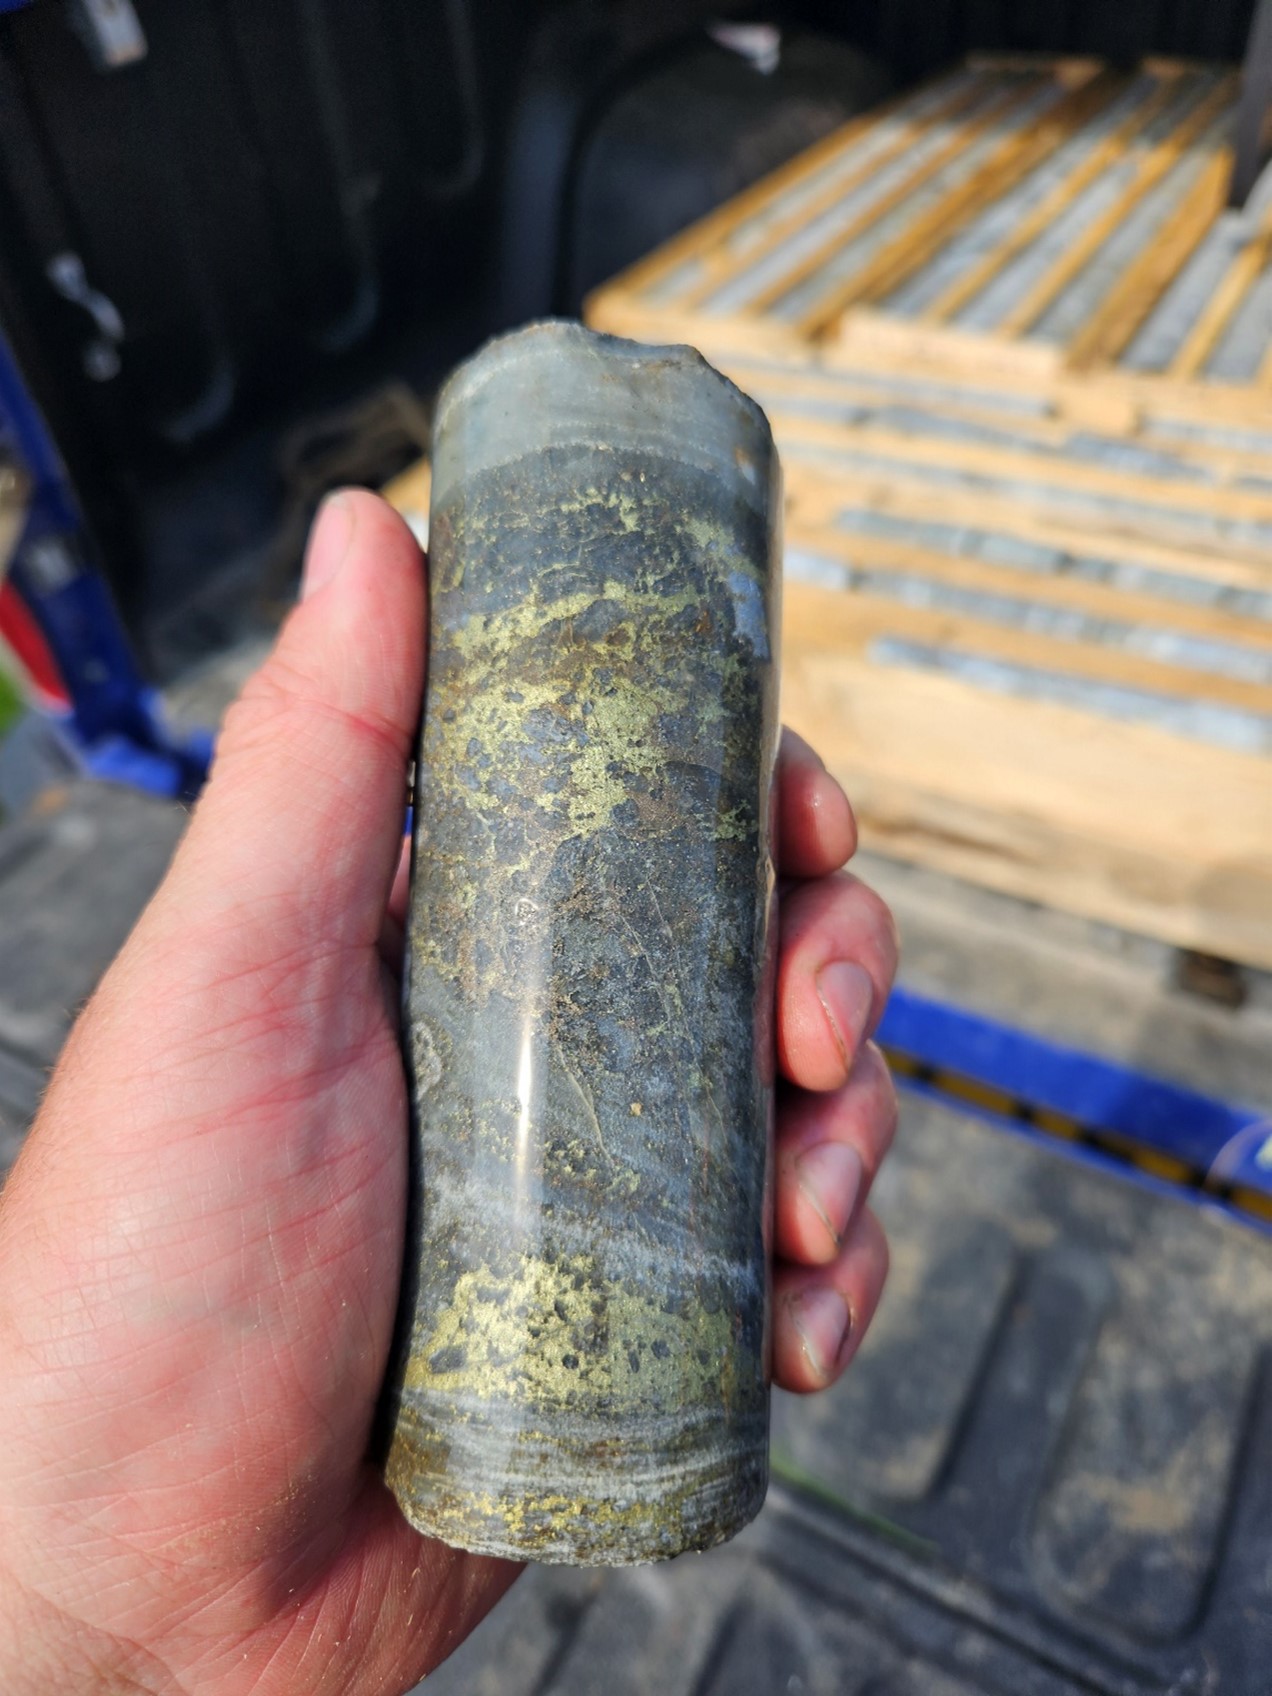 Section of drill core from hole 23-GL-02 showing rich chalcopyrite (a sulphide mineral that contains approximately 34% copper by weight).